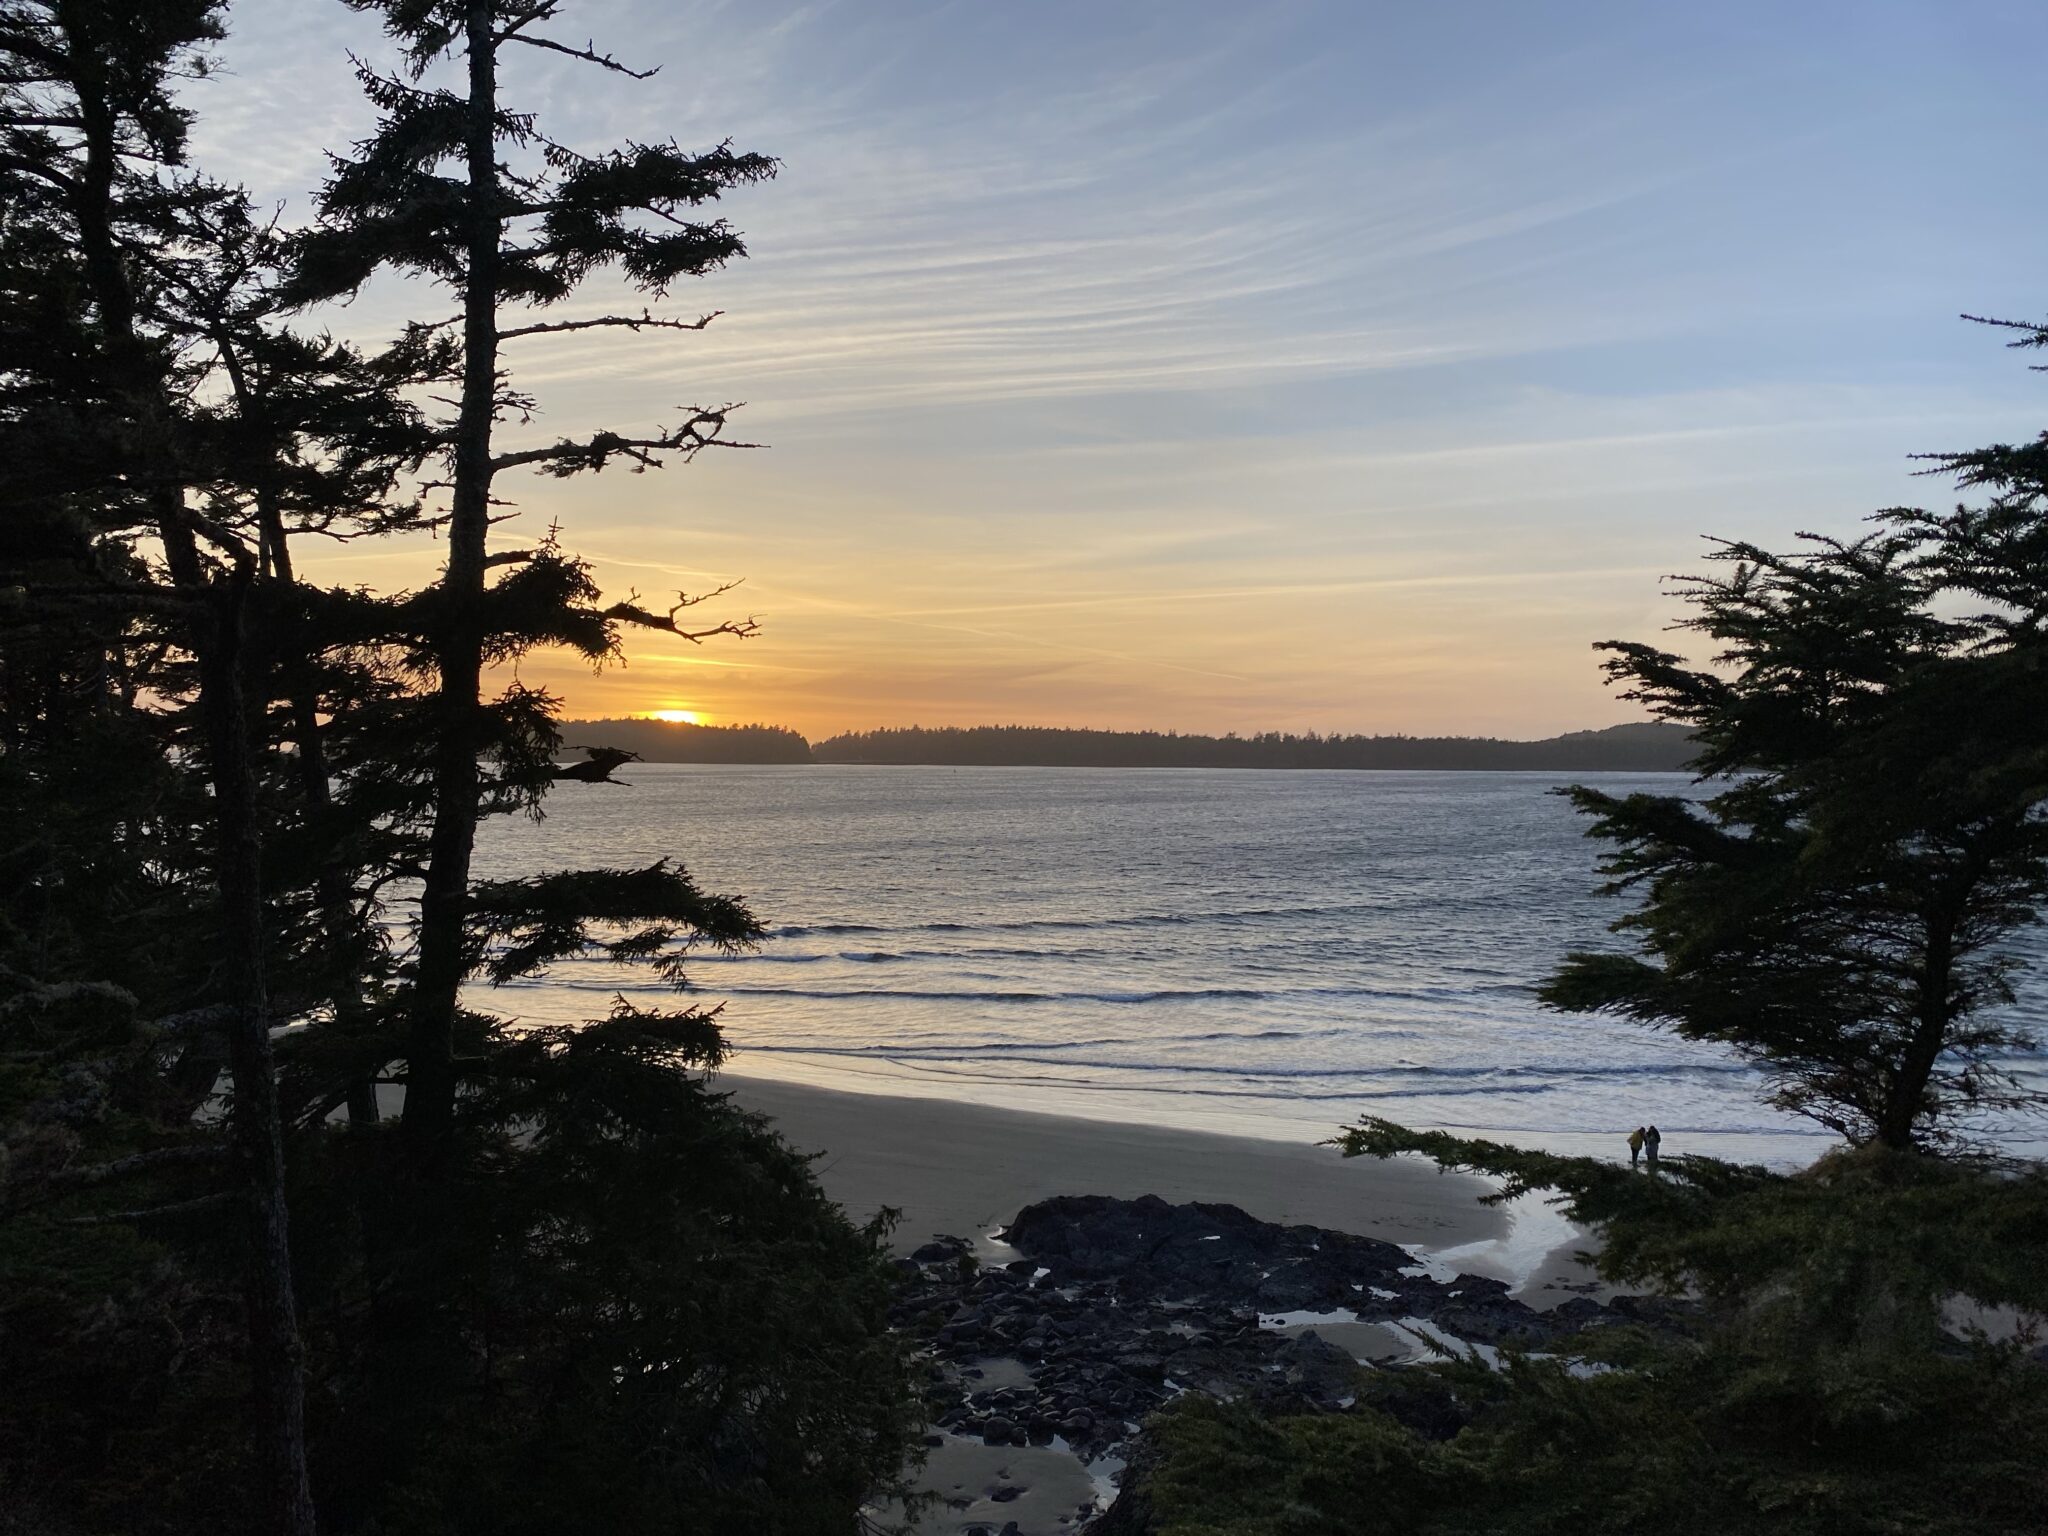 The sunset over Middle Beach, viewed from Middle Beach Lodge